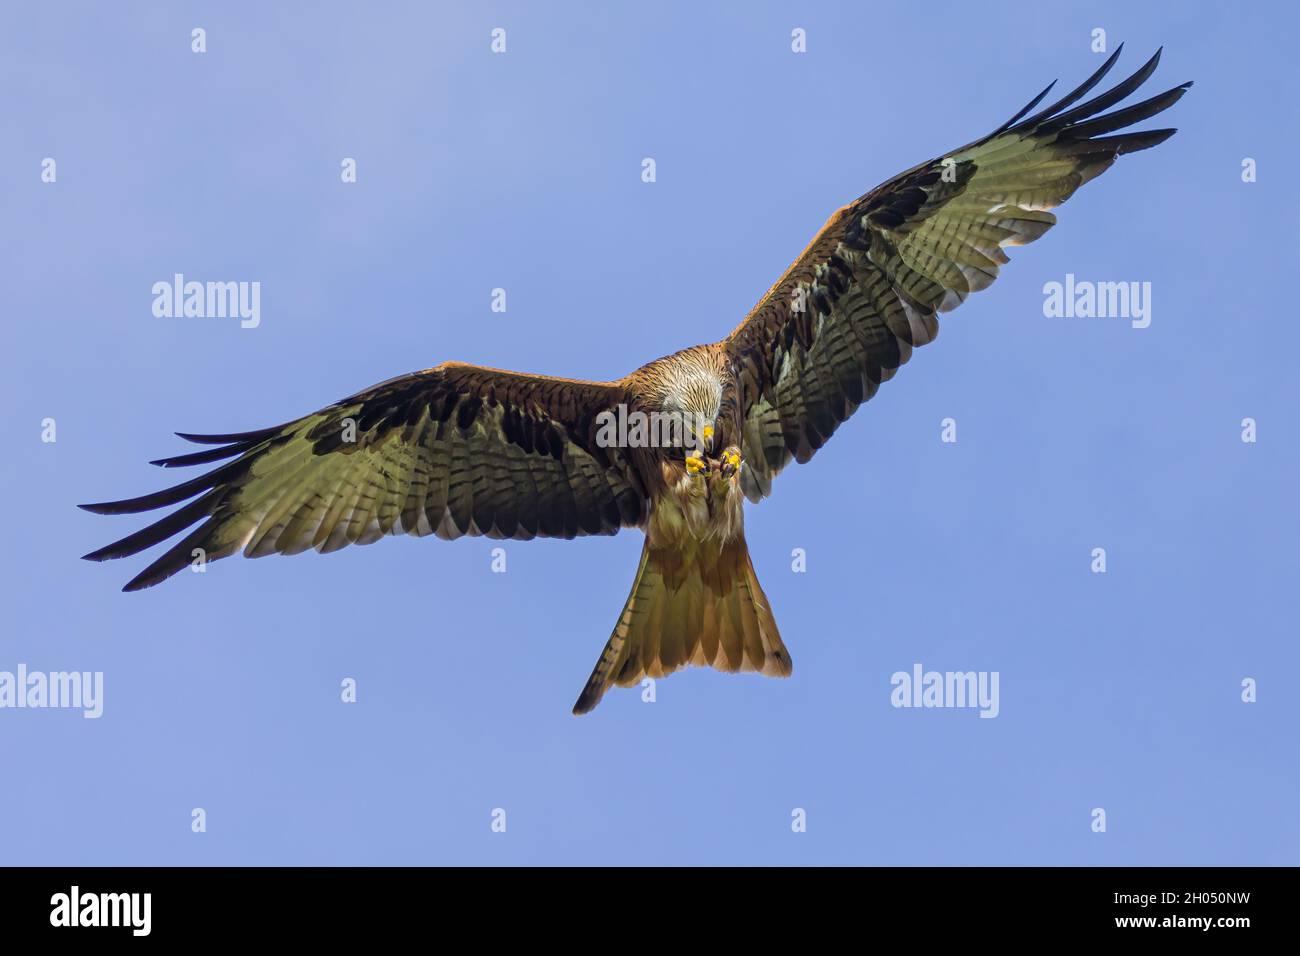 Red kites take their food from their claws into their beak in flight. Stock Photo